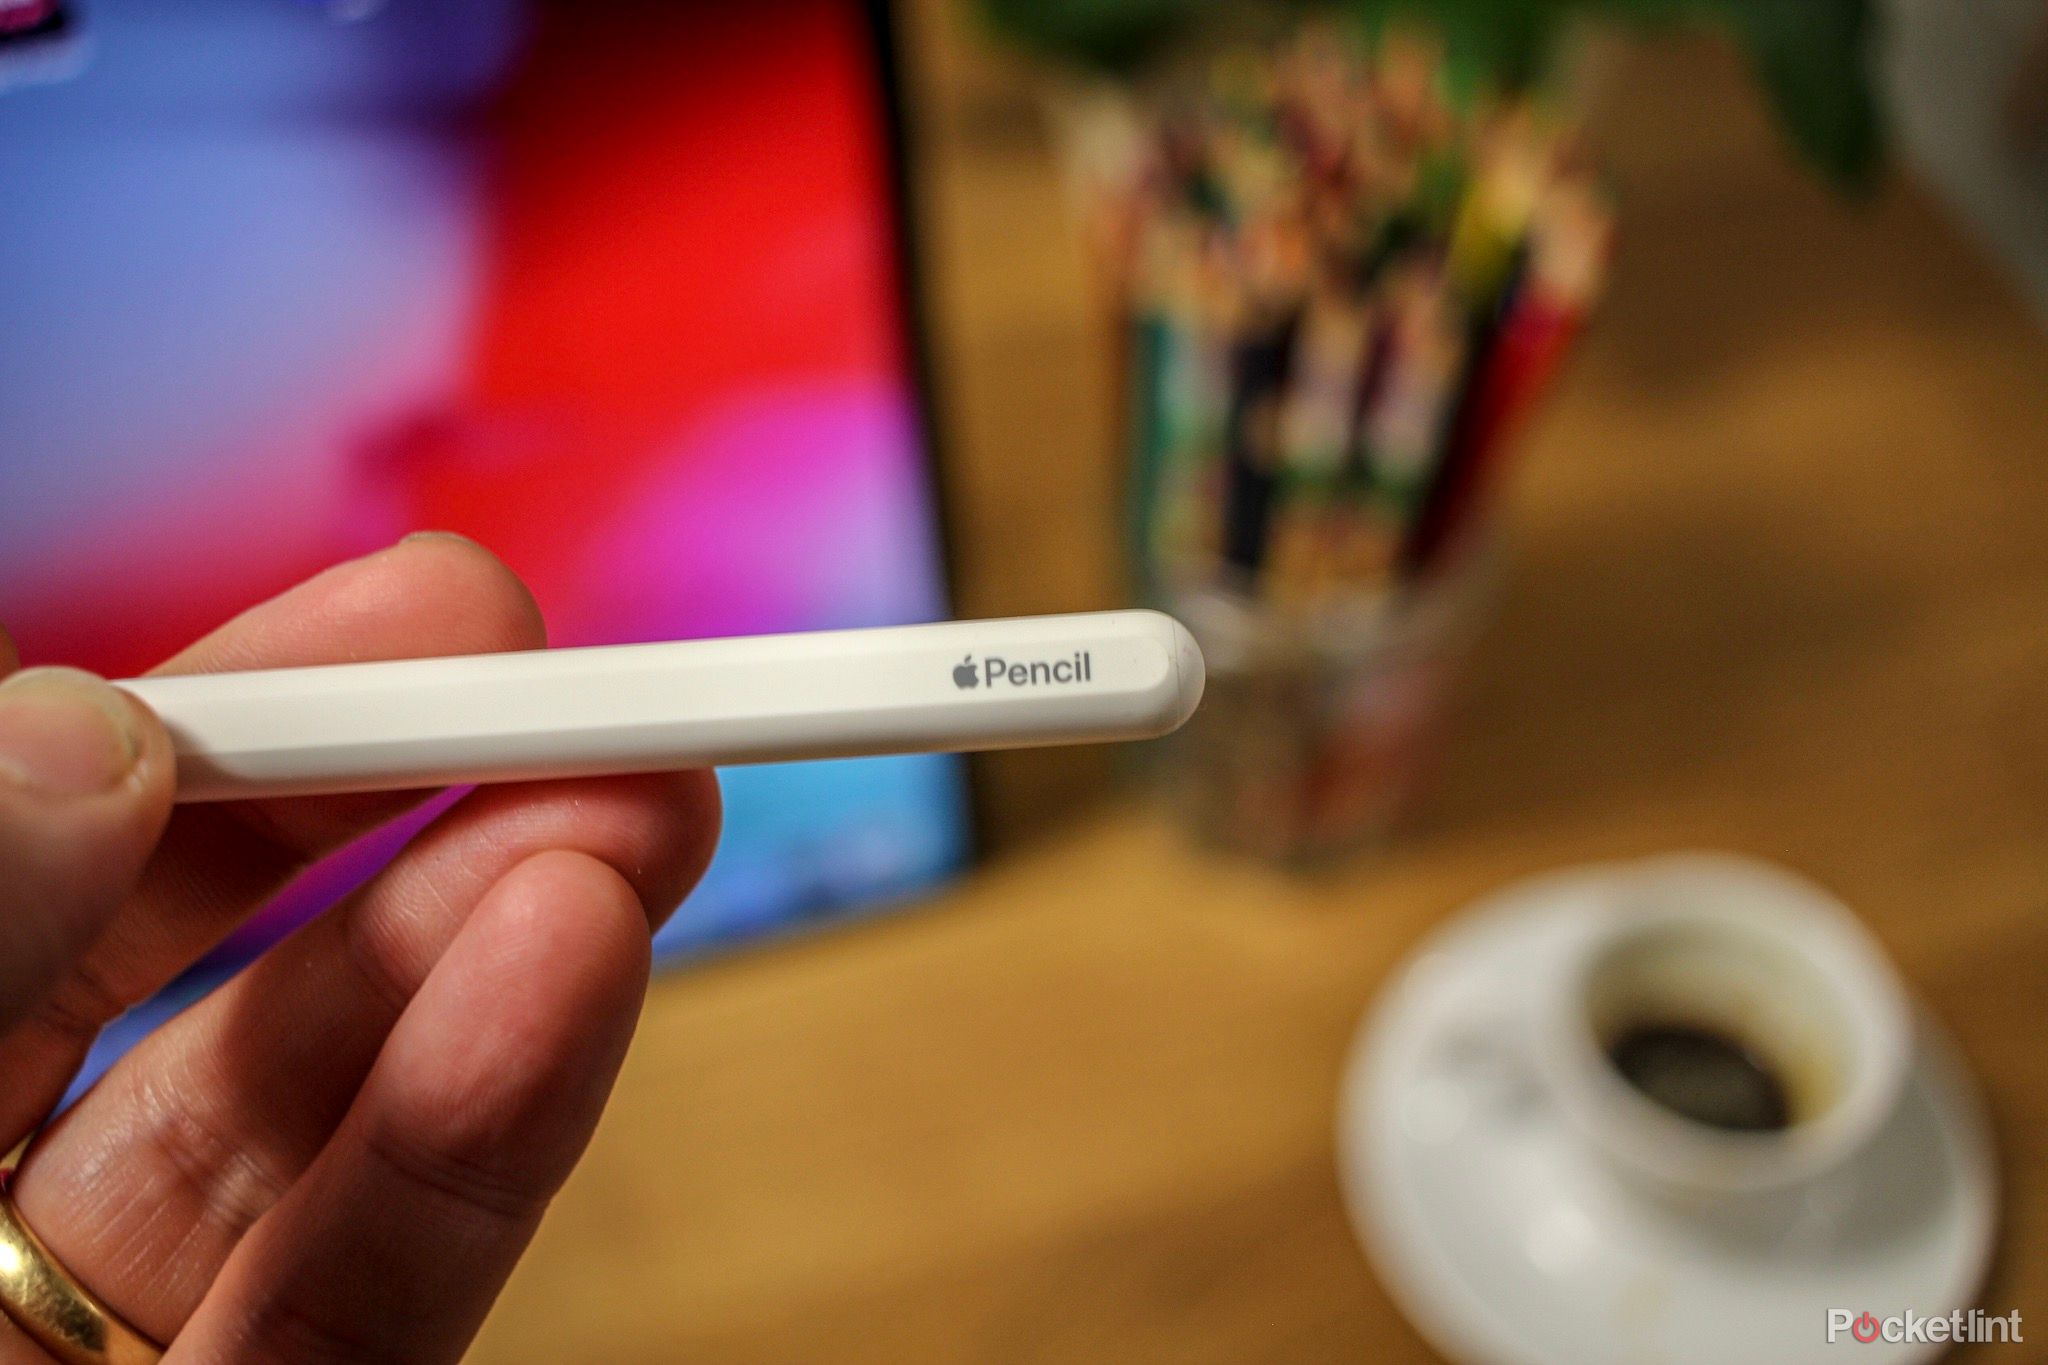 How to charge an Apple Pencil